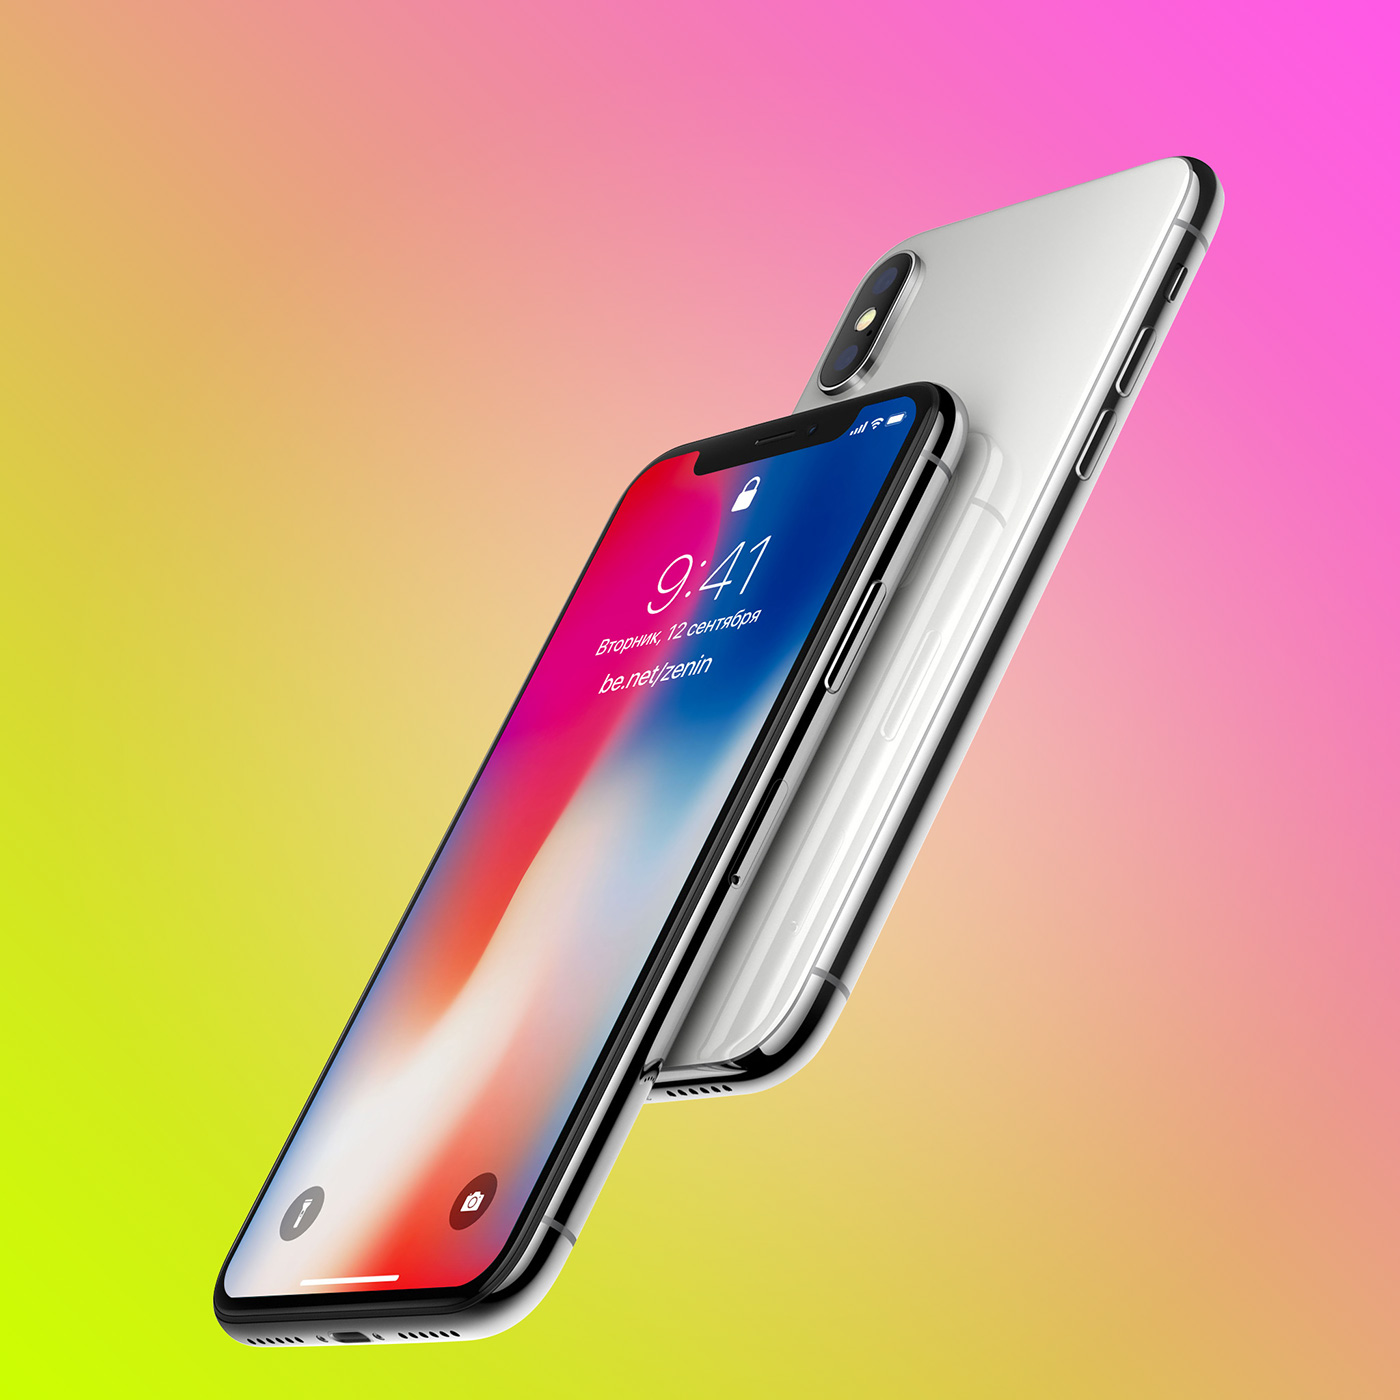 Download iPhone X free PSD mockup on Behance